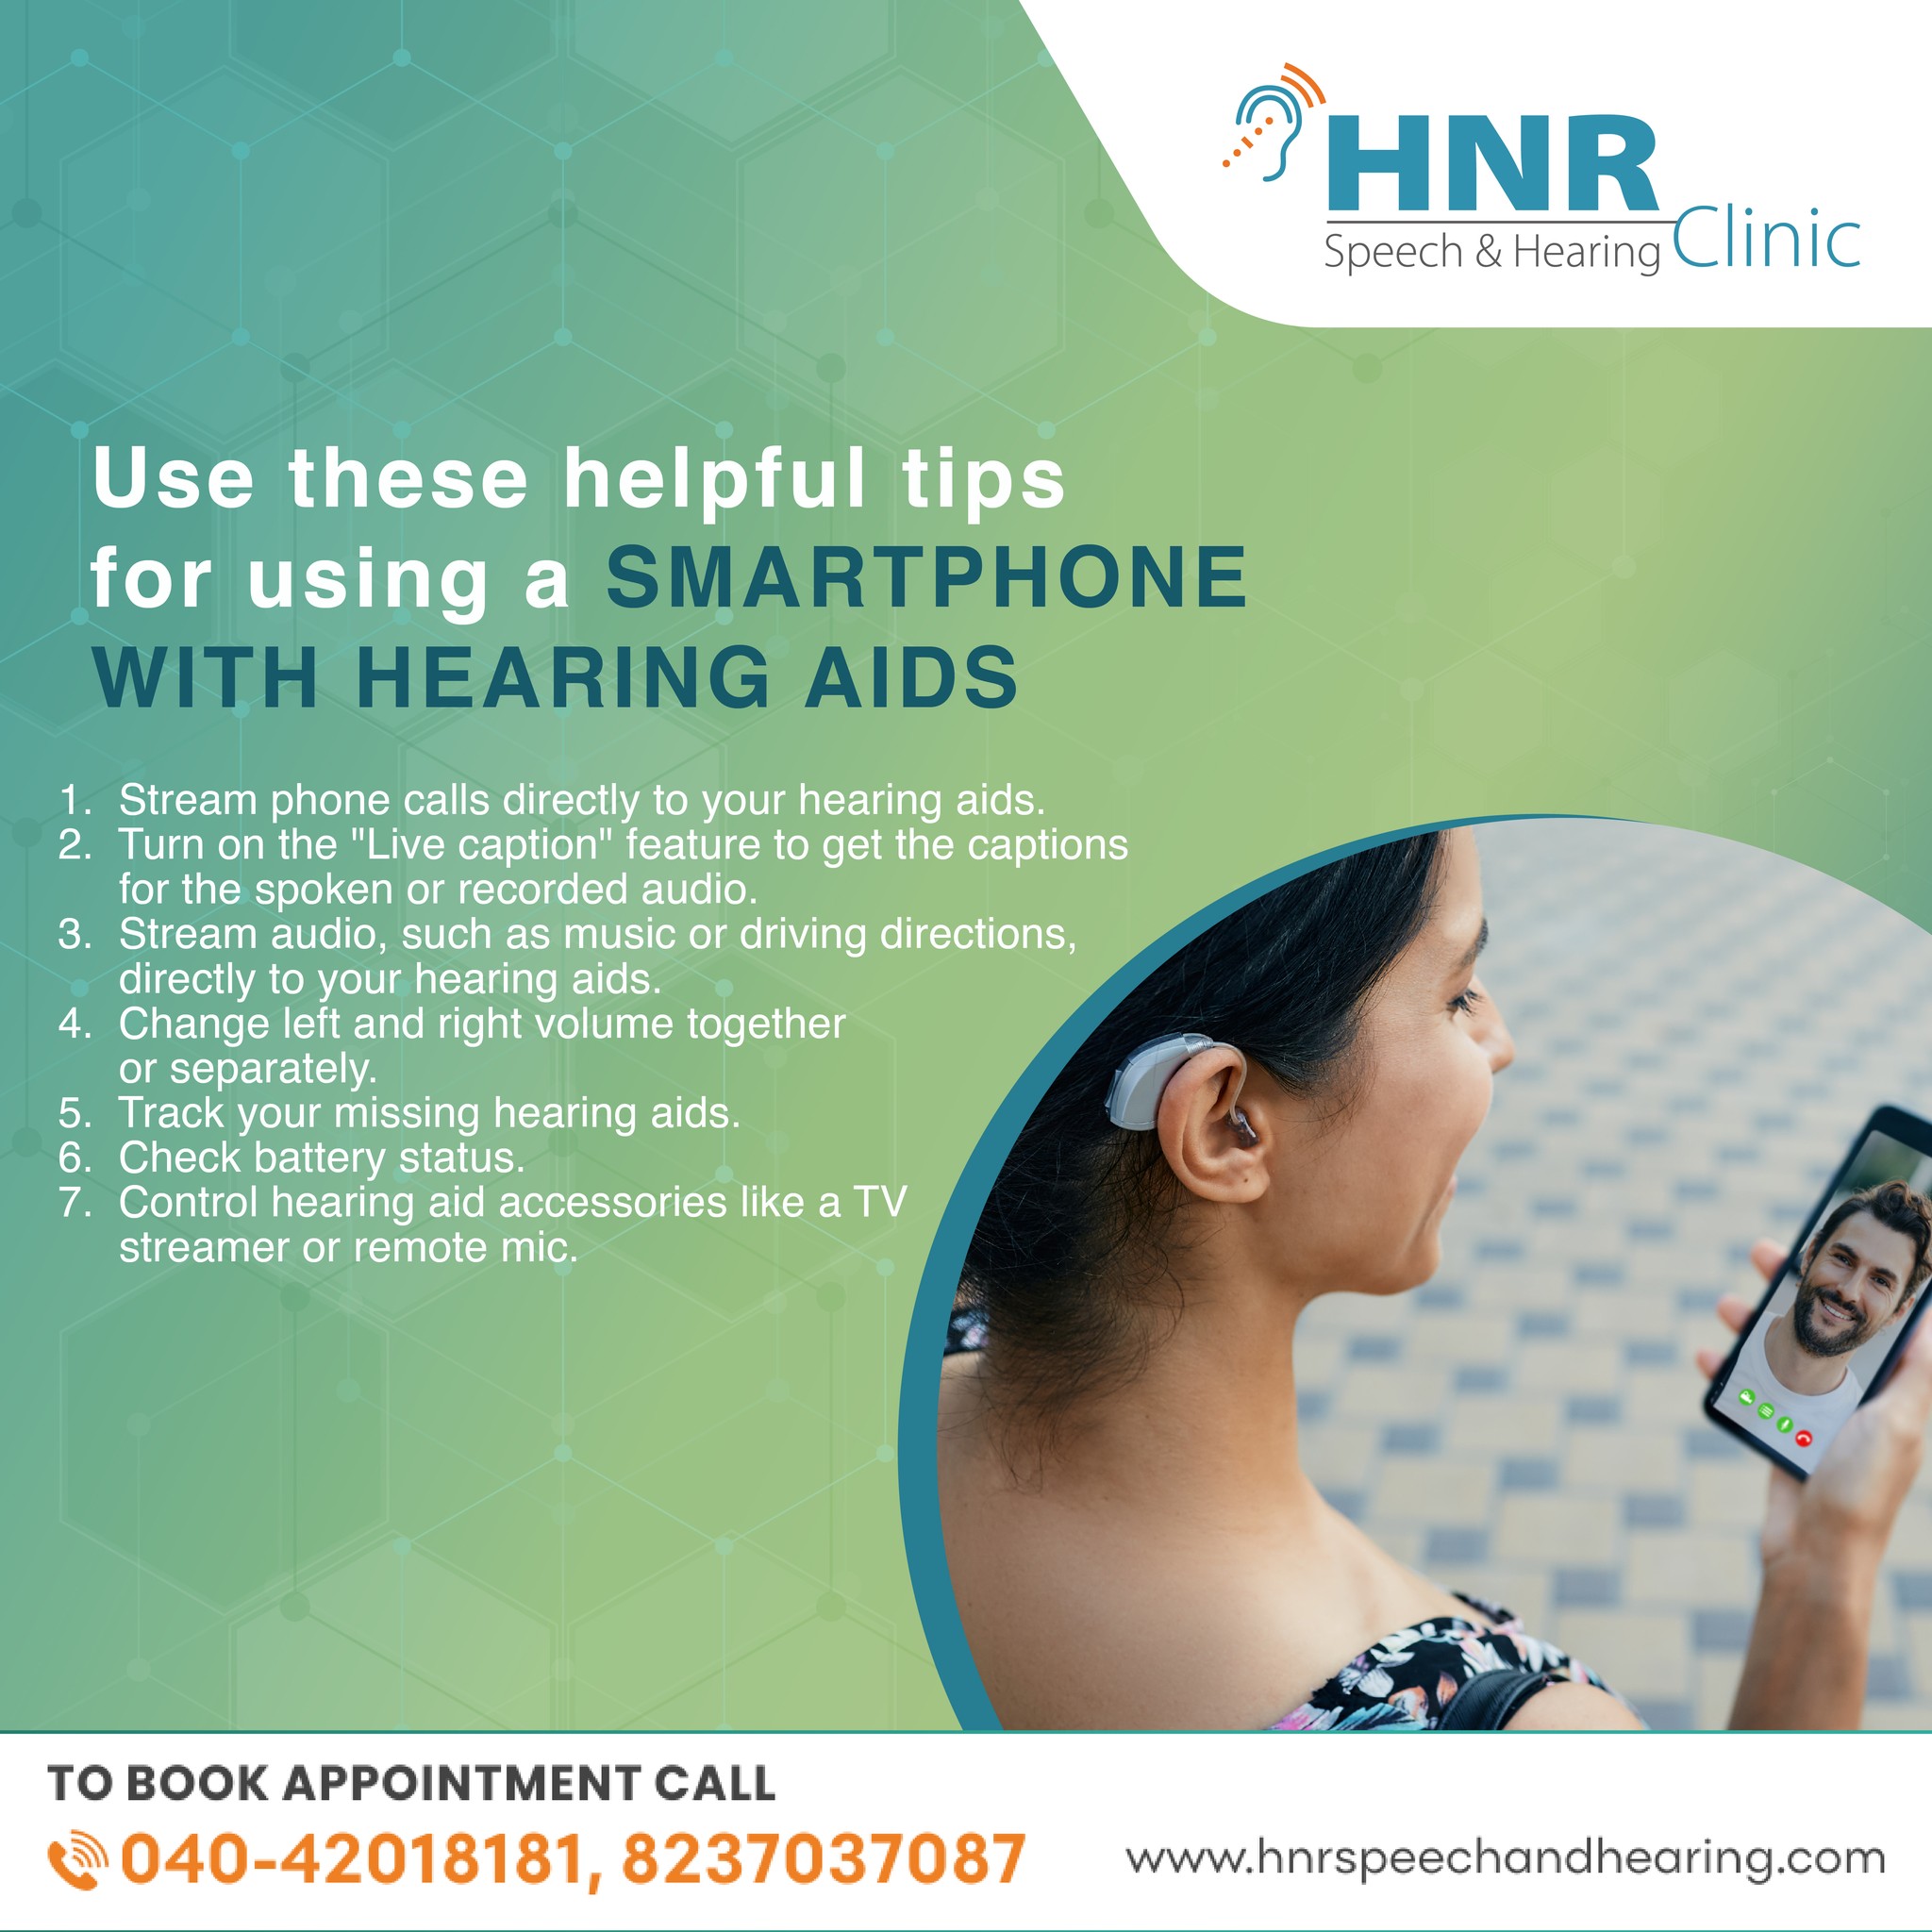 Best Hearing Aid in HyderabadHealth and BeautyClinicsAll Indiaother